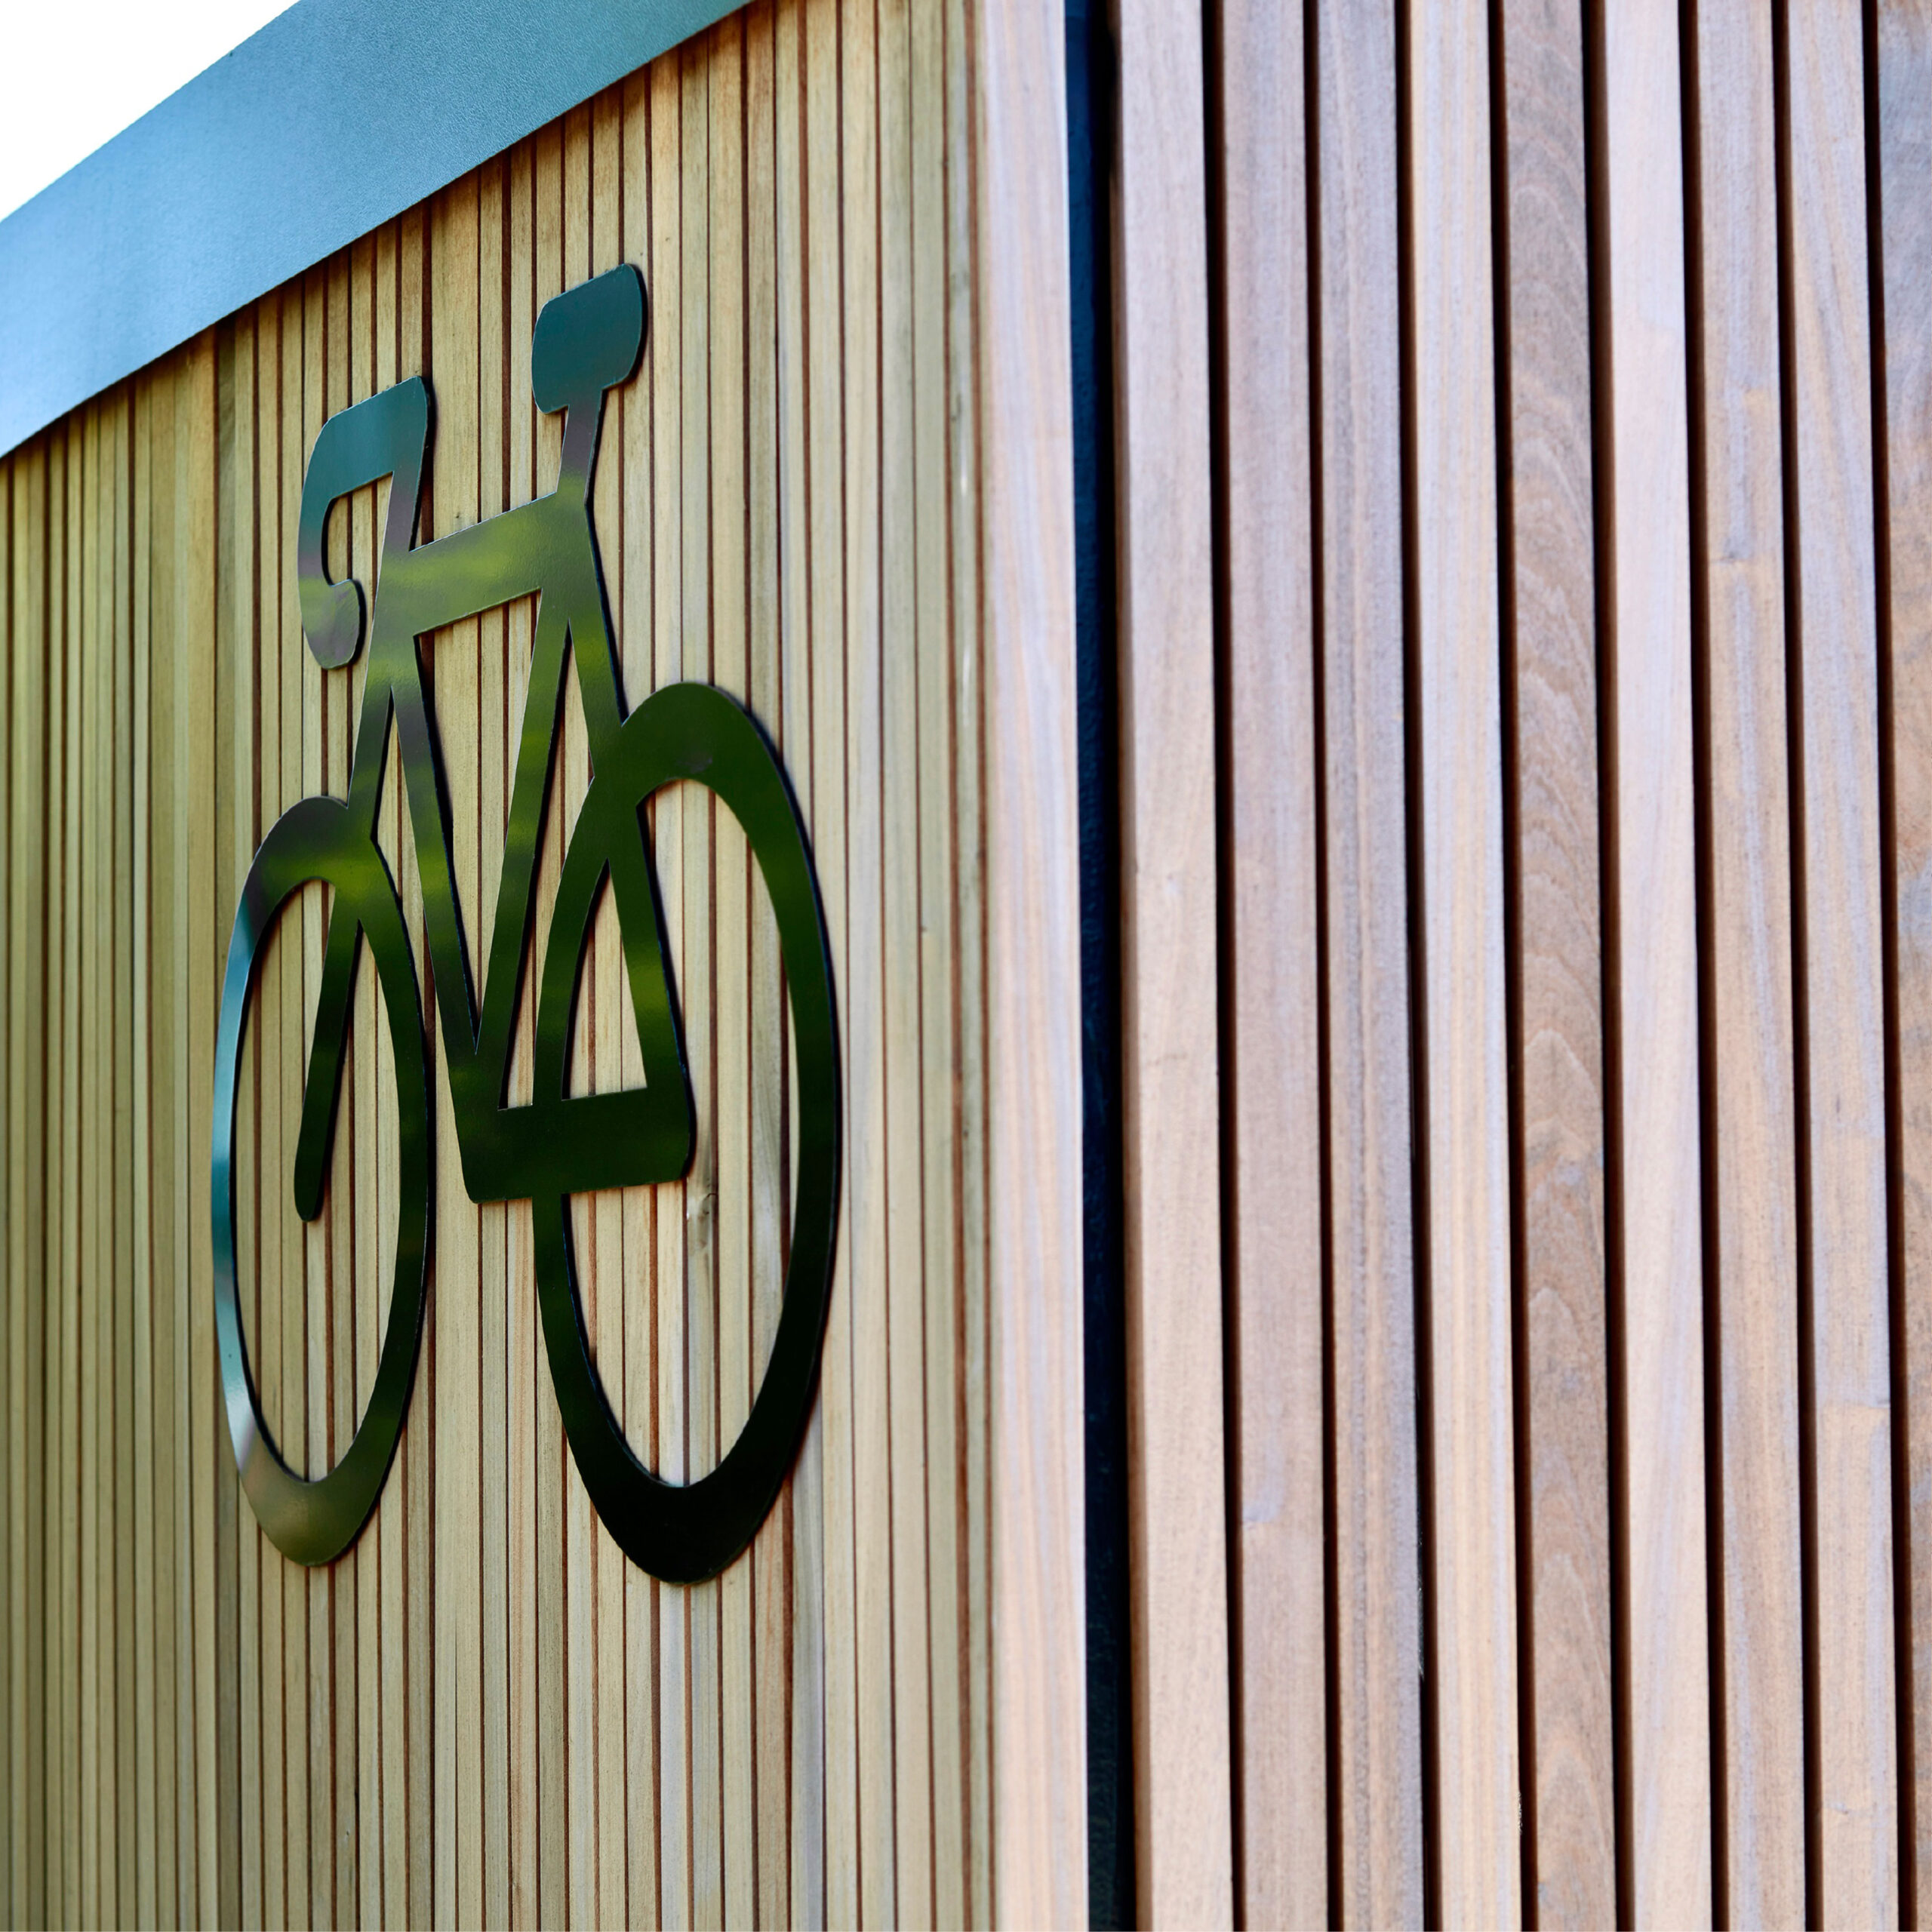 A black bicycle symbol mounted on a wooden slat wall, with part of the sign crossing over onto the slats, creating a clean, modern look.